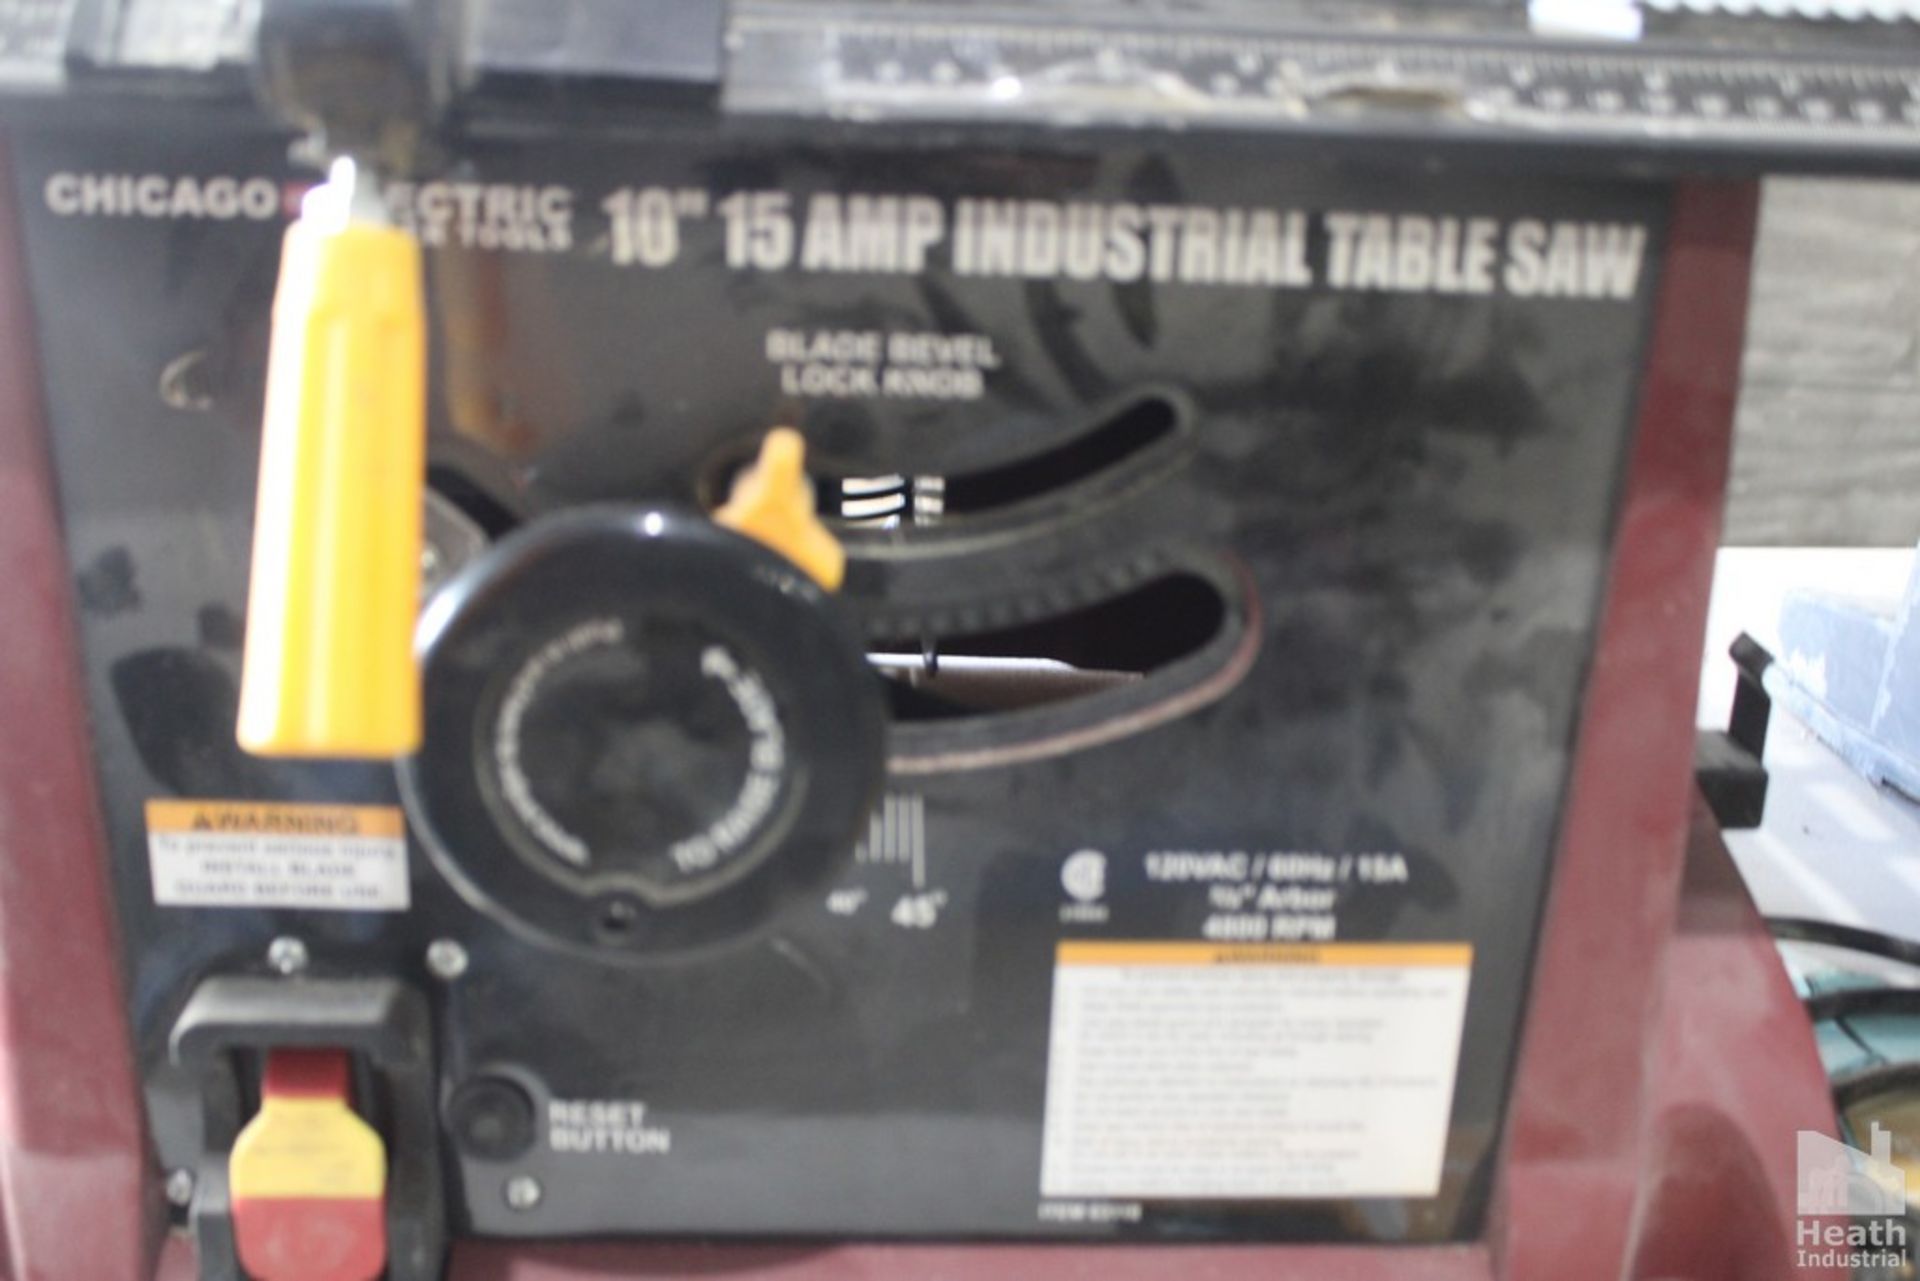 CHICAGO ELECTRIC 10" 15 AMP INDUSTRIAL TABLE SAW - Image 3 of 3